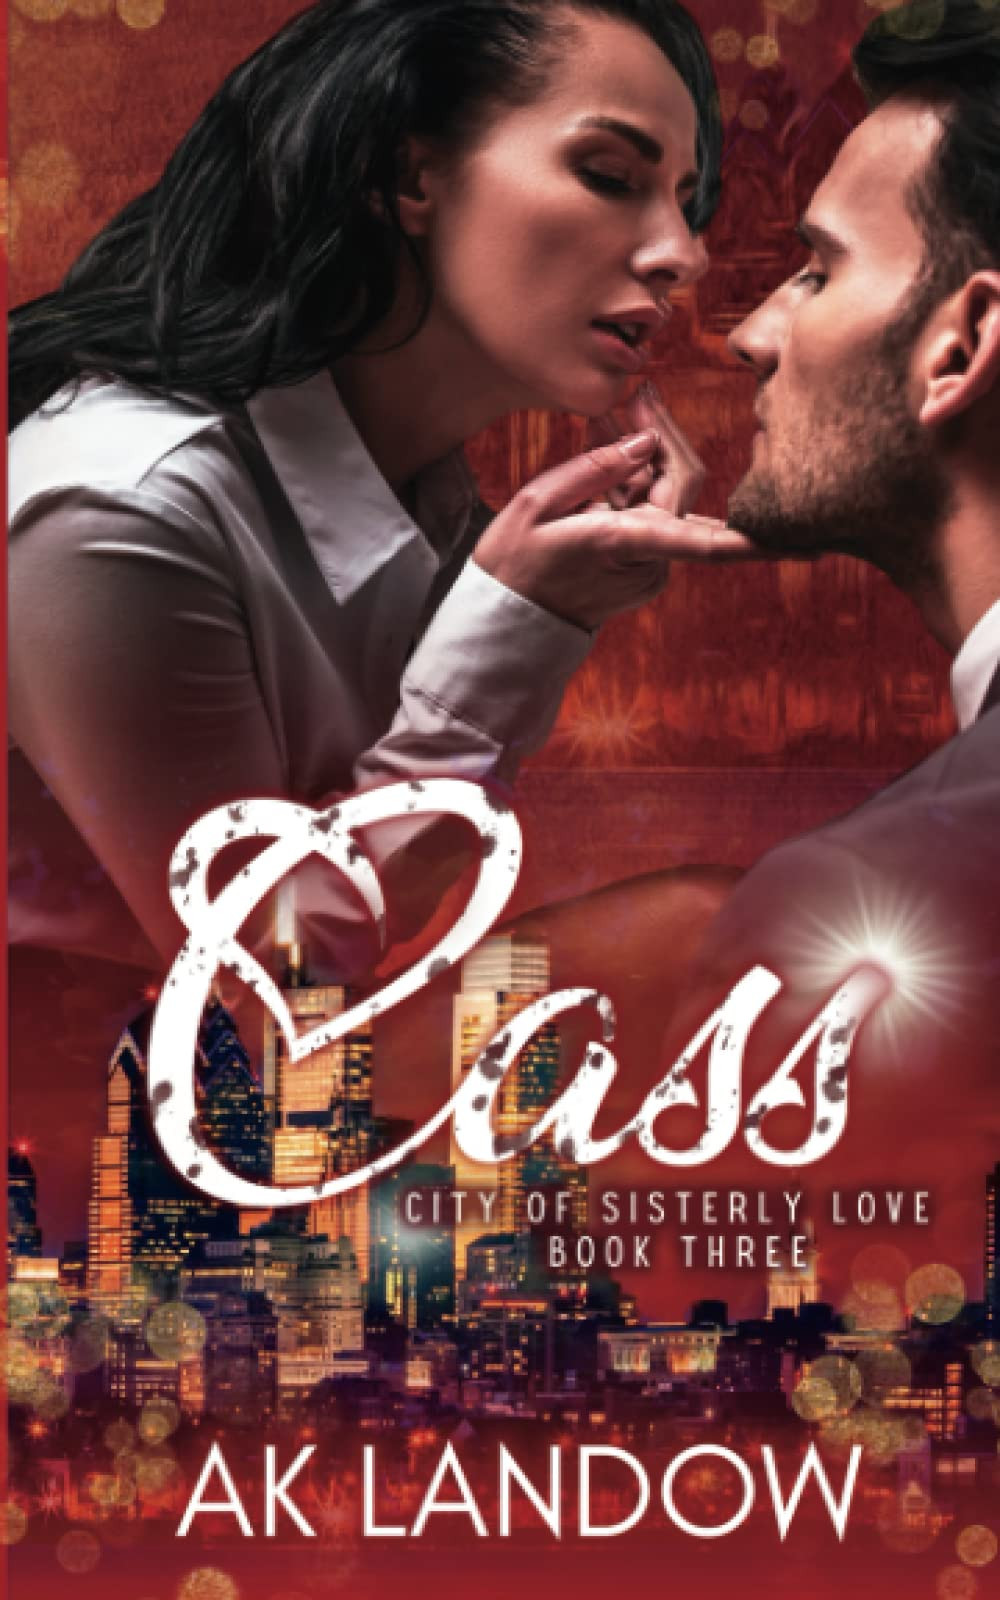 CASS: City of Sisterly Love Book 3